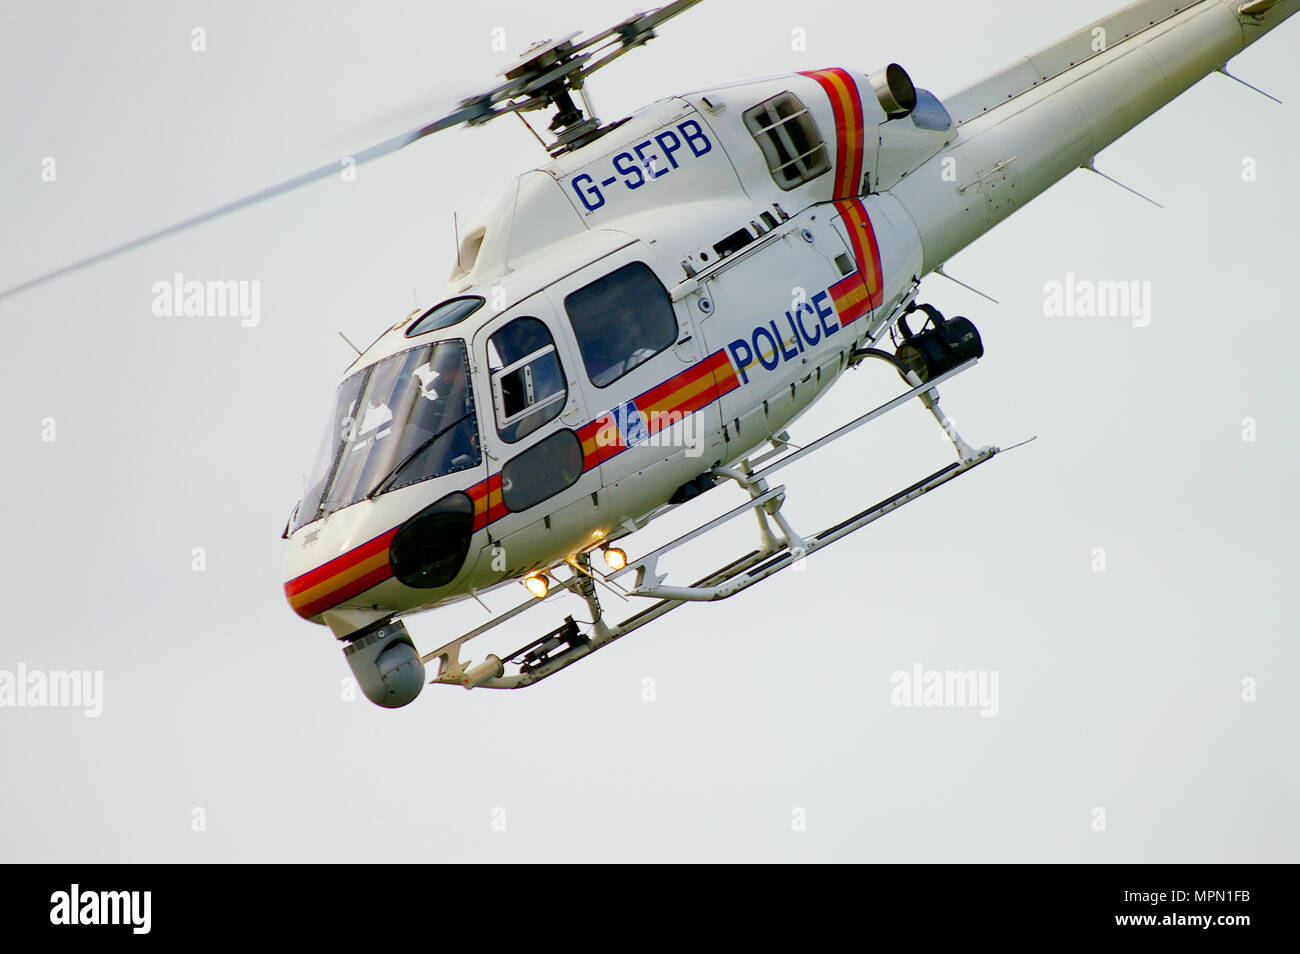 Police helicopter G-SEPB Eurocopter AS355 Ecureuil (Squirrel) with nose camera sight turret. Flying Stock Photo